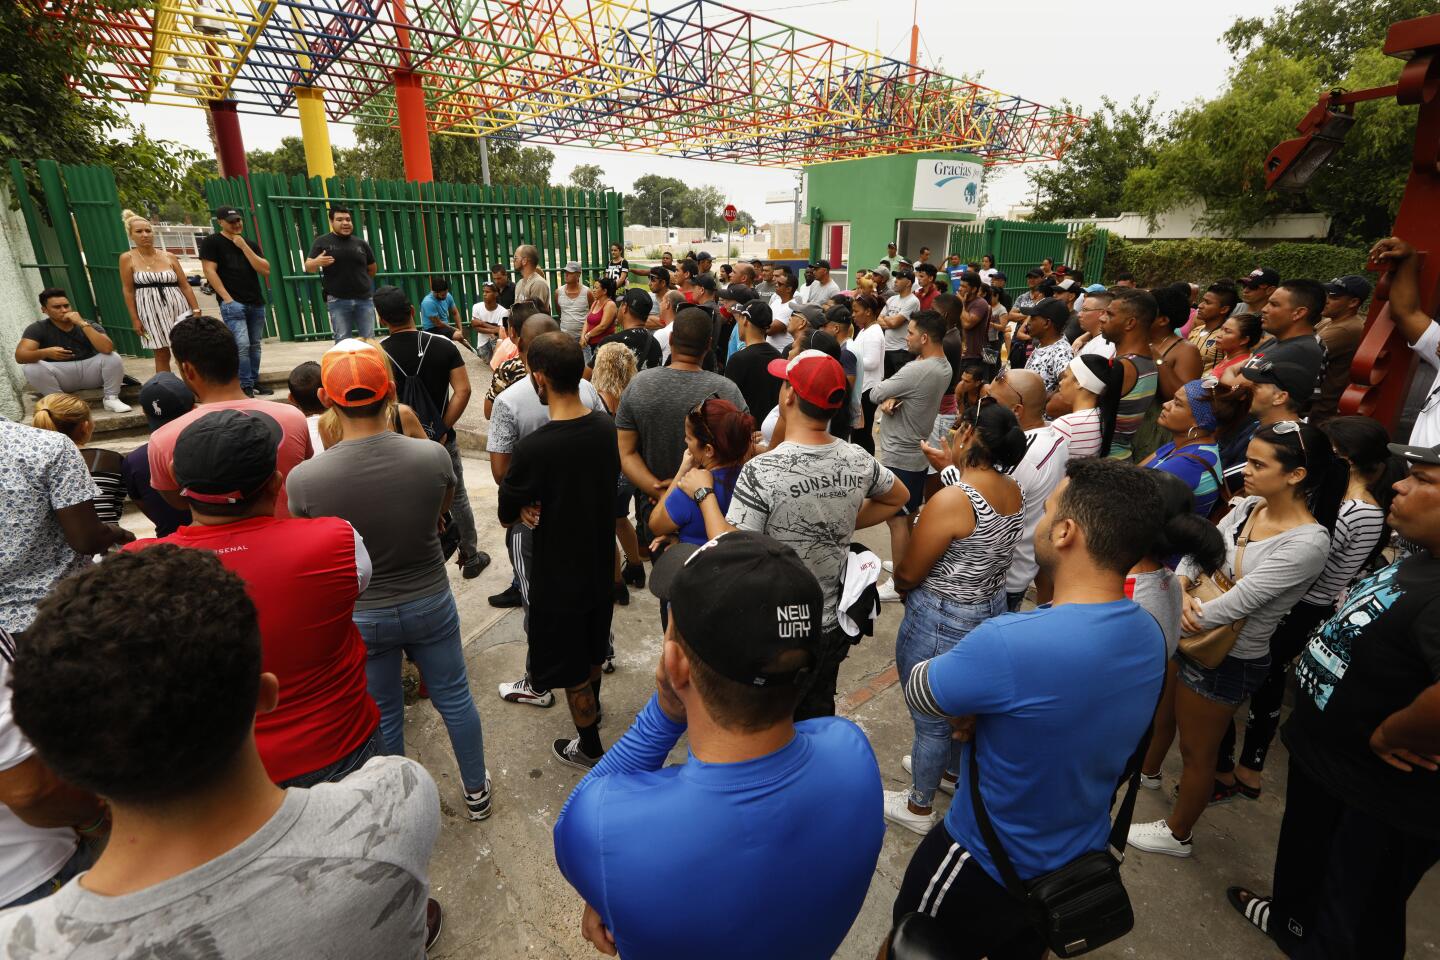 ACUNIA, MEXICO--Over 400 Cubans are camping in a park on the Mexico-U.S. border in Acunia, Mexico. There is a wait list, with over 500 names on it, but only three or four get called each day to cross the bridge to Del Rio to apply for asylum. Some have been waiting months and the camp may be closed soon and those waiting moved to some other location in Acunia, Mexico. (Carolyn Cole/Los Angeles Times)